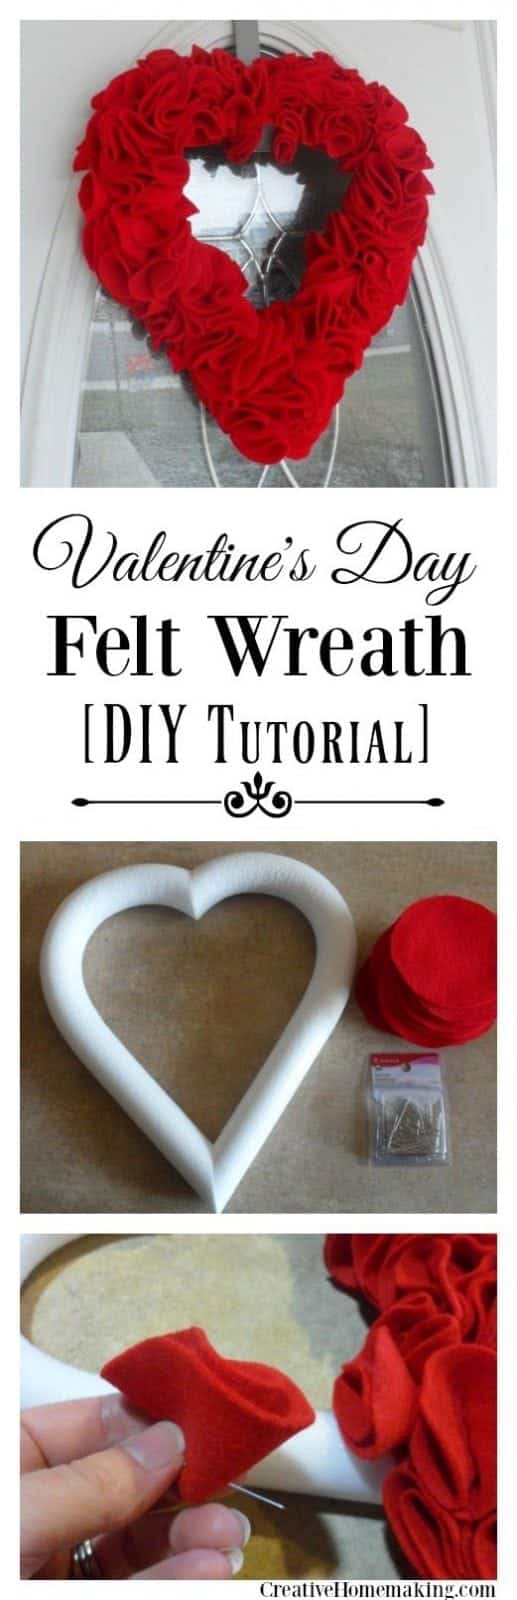 How To Make A Valentine's Day Wreath For Under $10 - Worthing